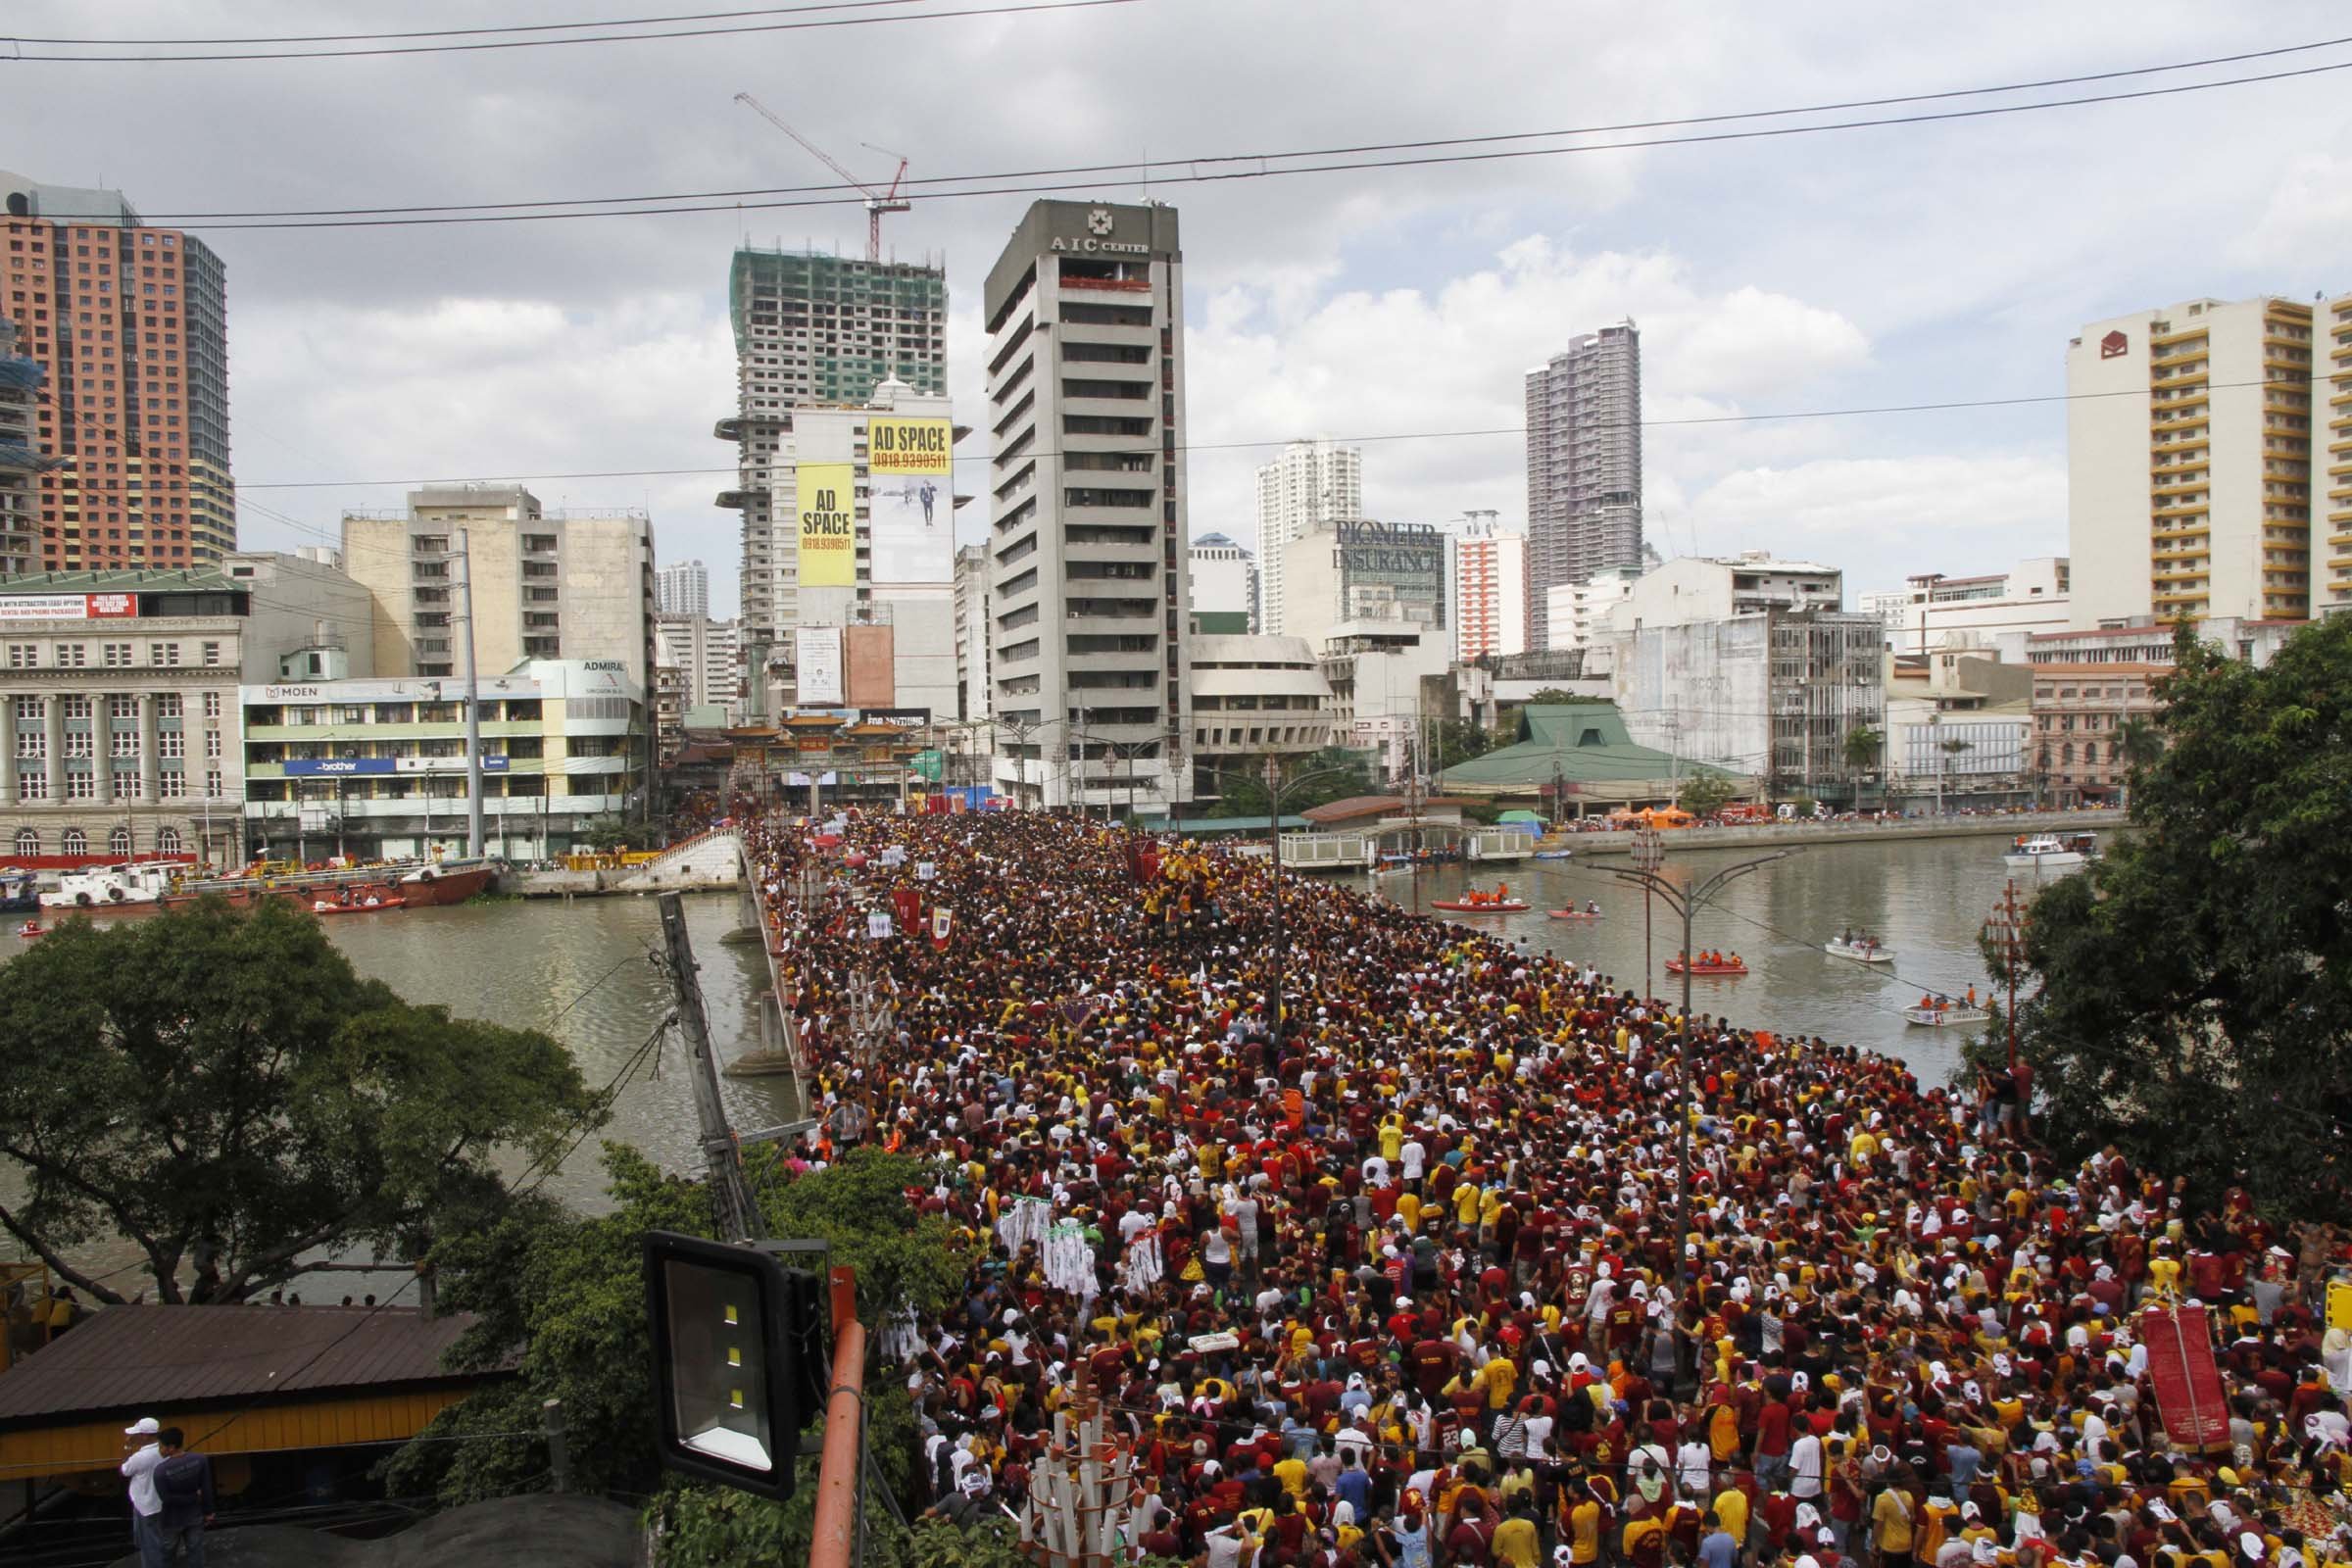 Millions of devotees join the tradational 'Traslacion' of the Feast of the Black Nazarene